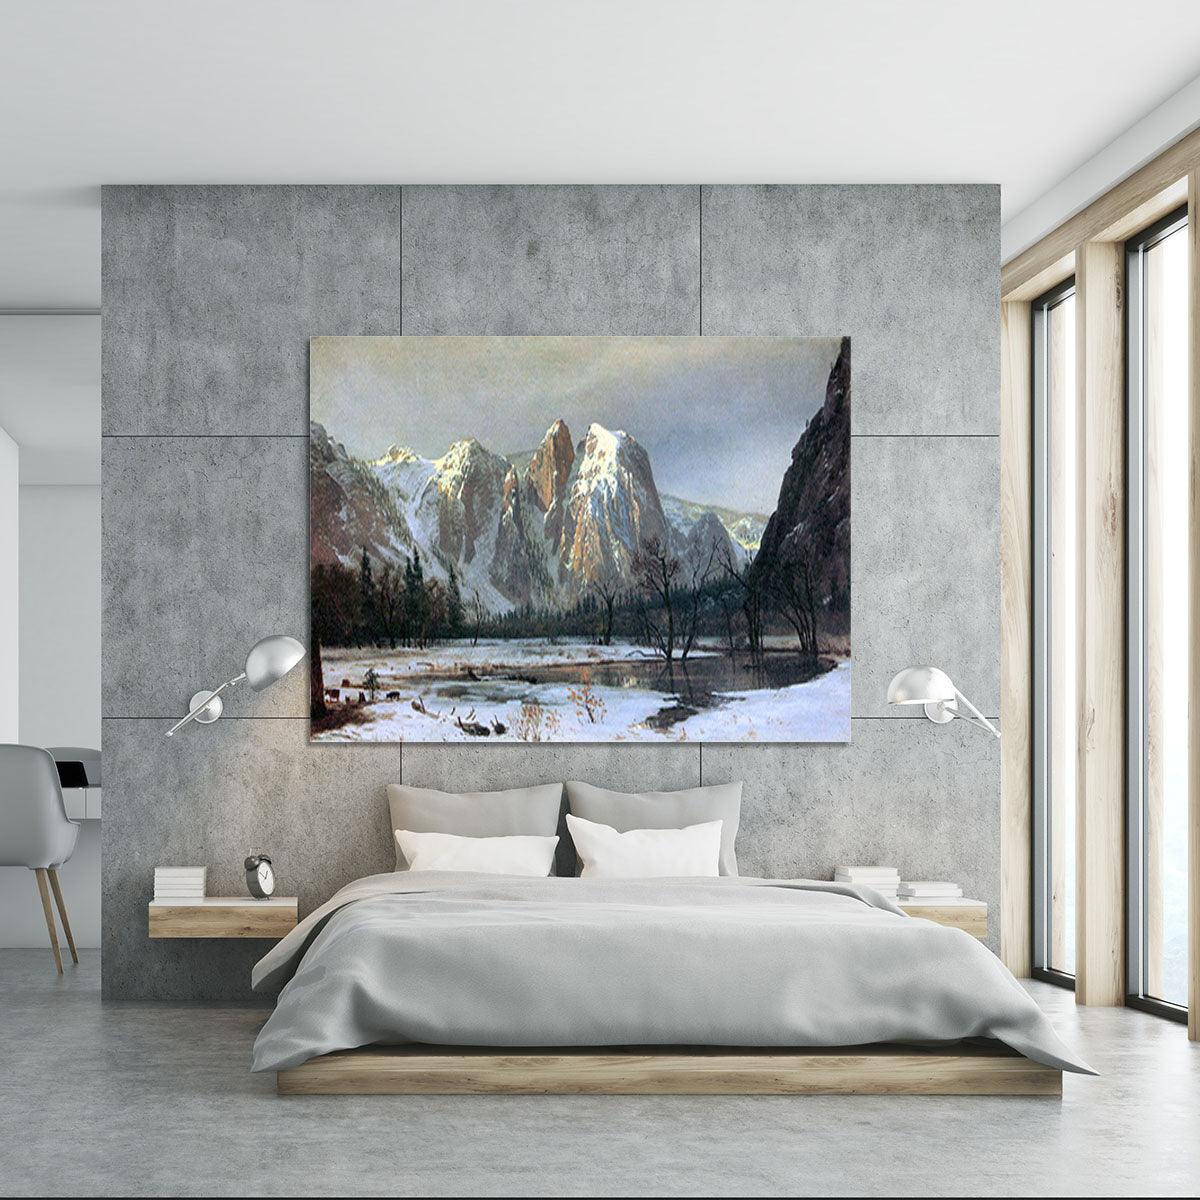 Cathedral Rocks Yosemite by Bierstadt Canvas Print or Poster - Canvas Art Rocks - 5